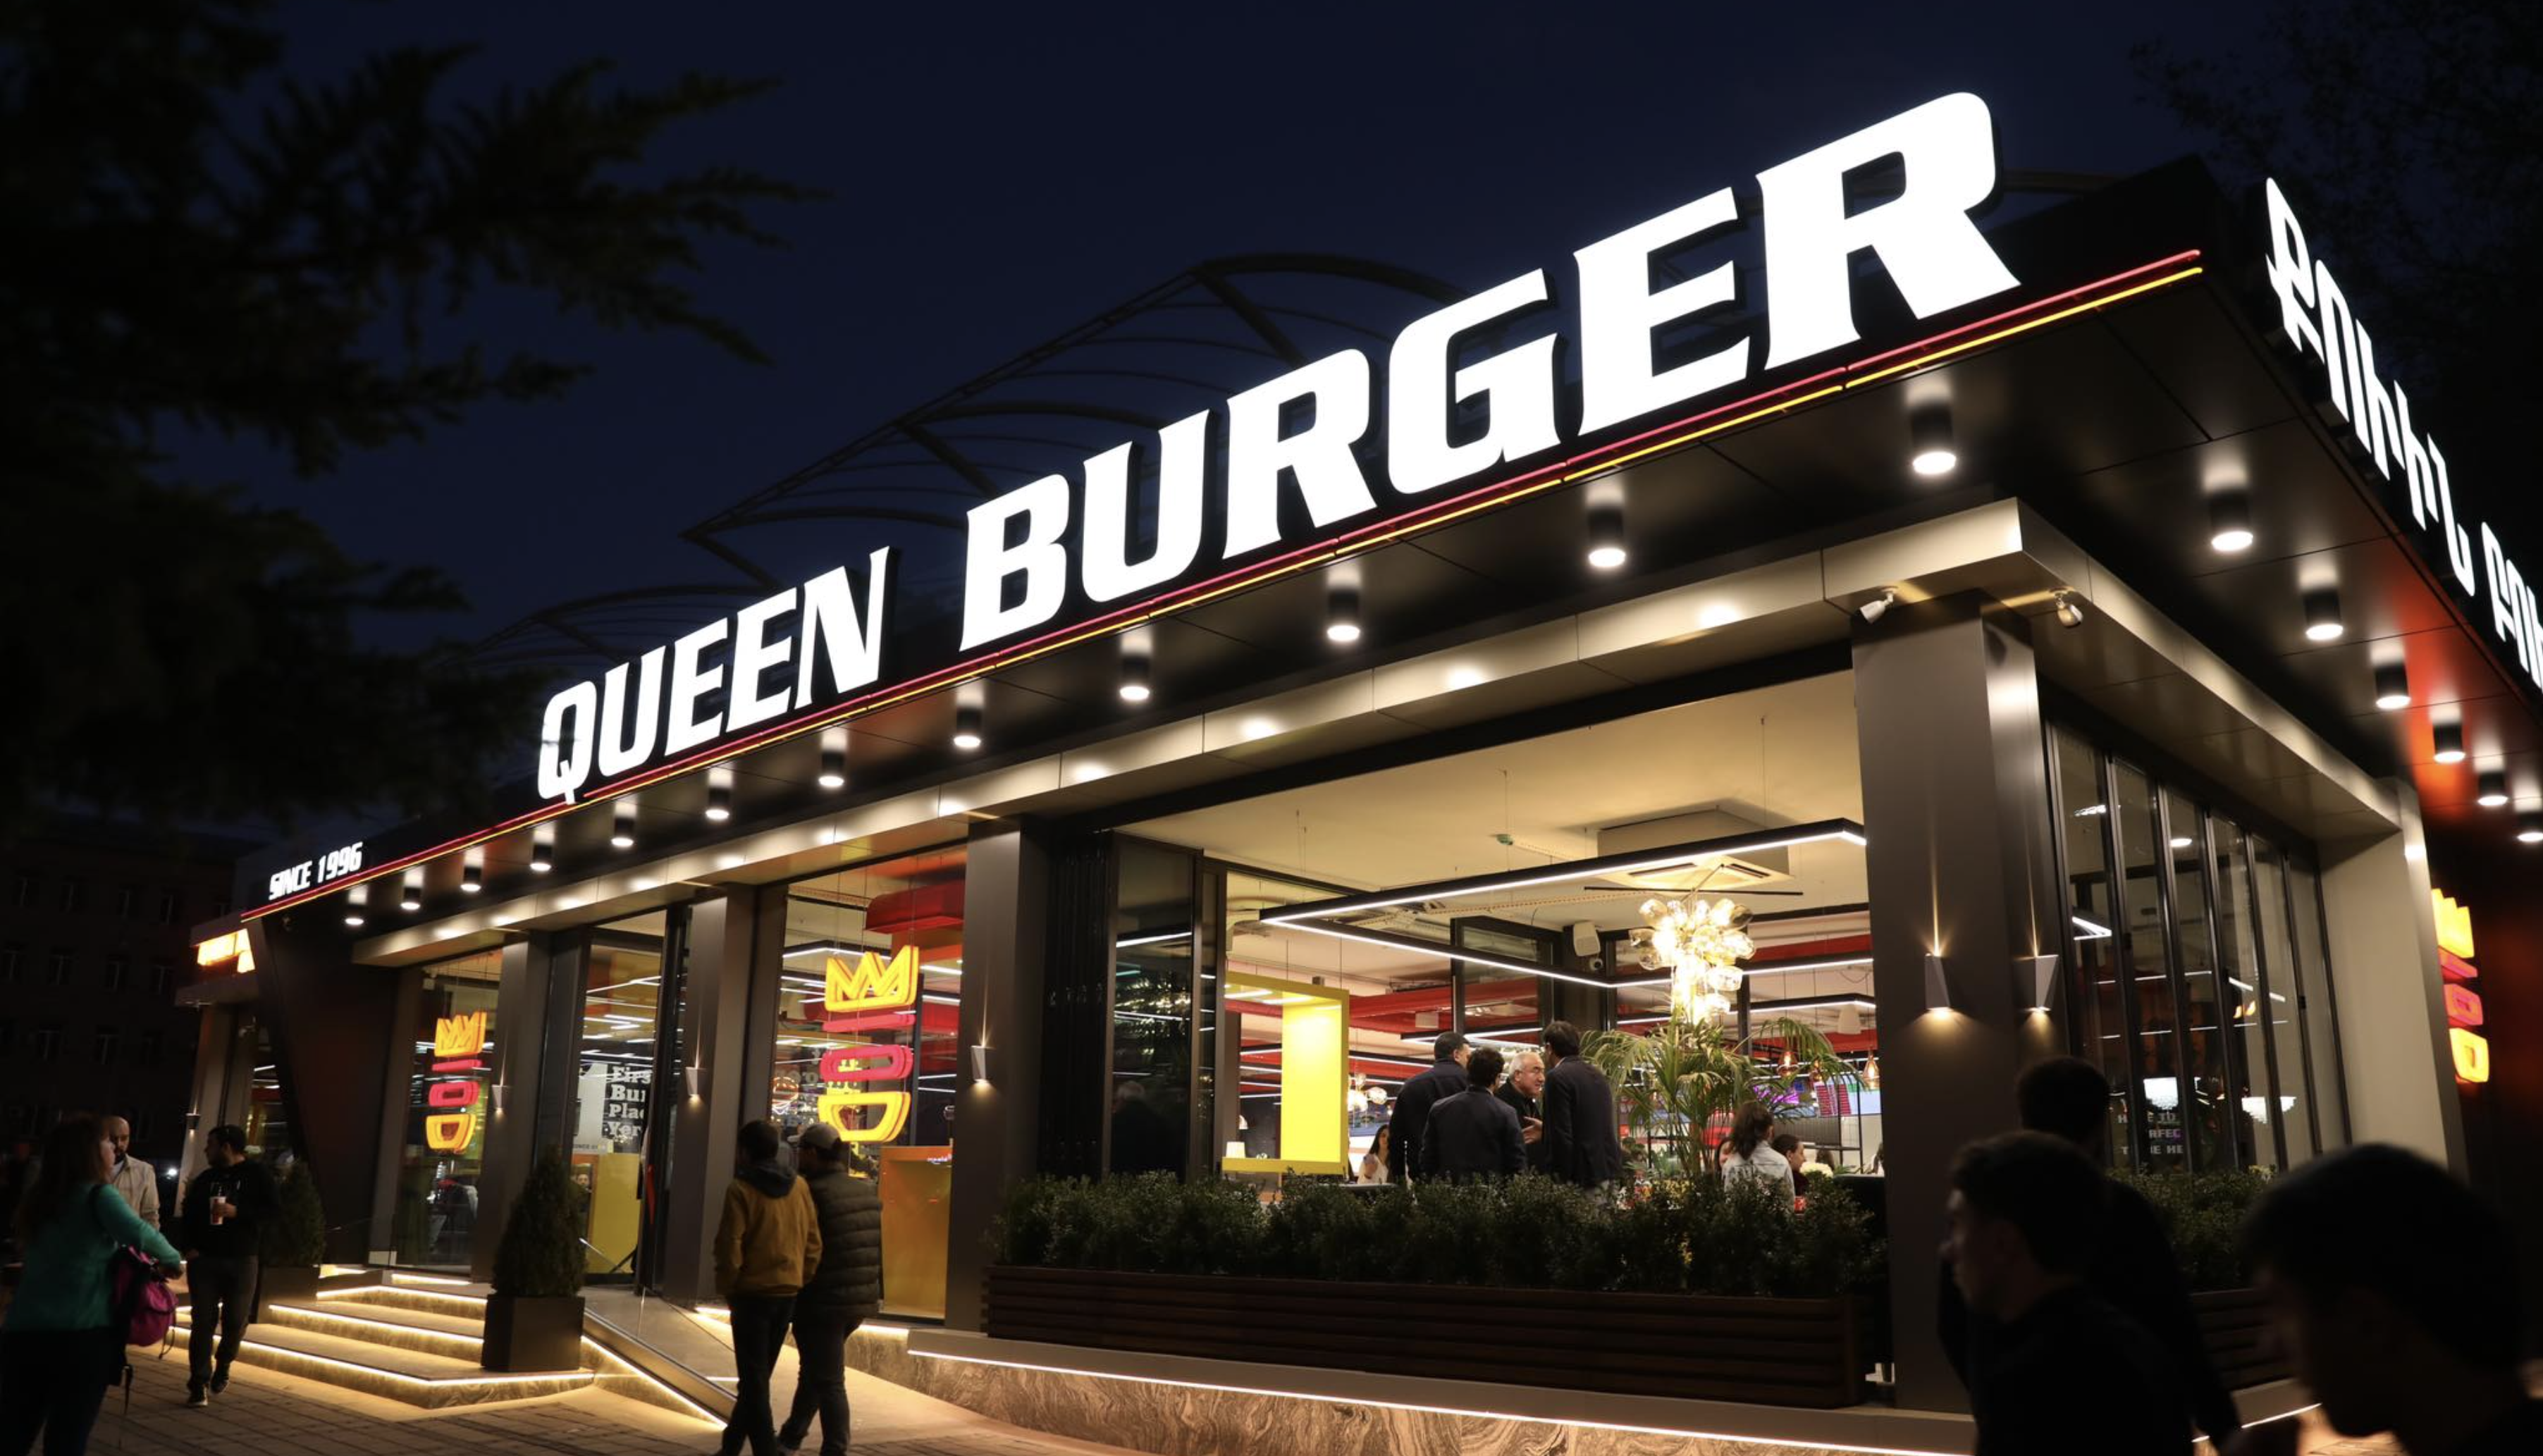 Armen Music has chosen WorkPro for the installation at QUEEN BURGER.